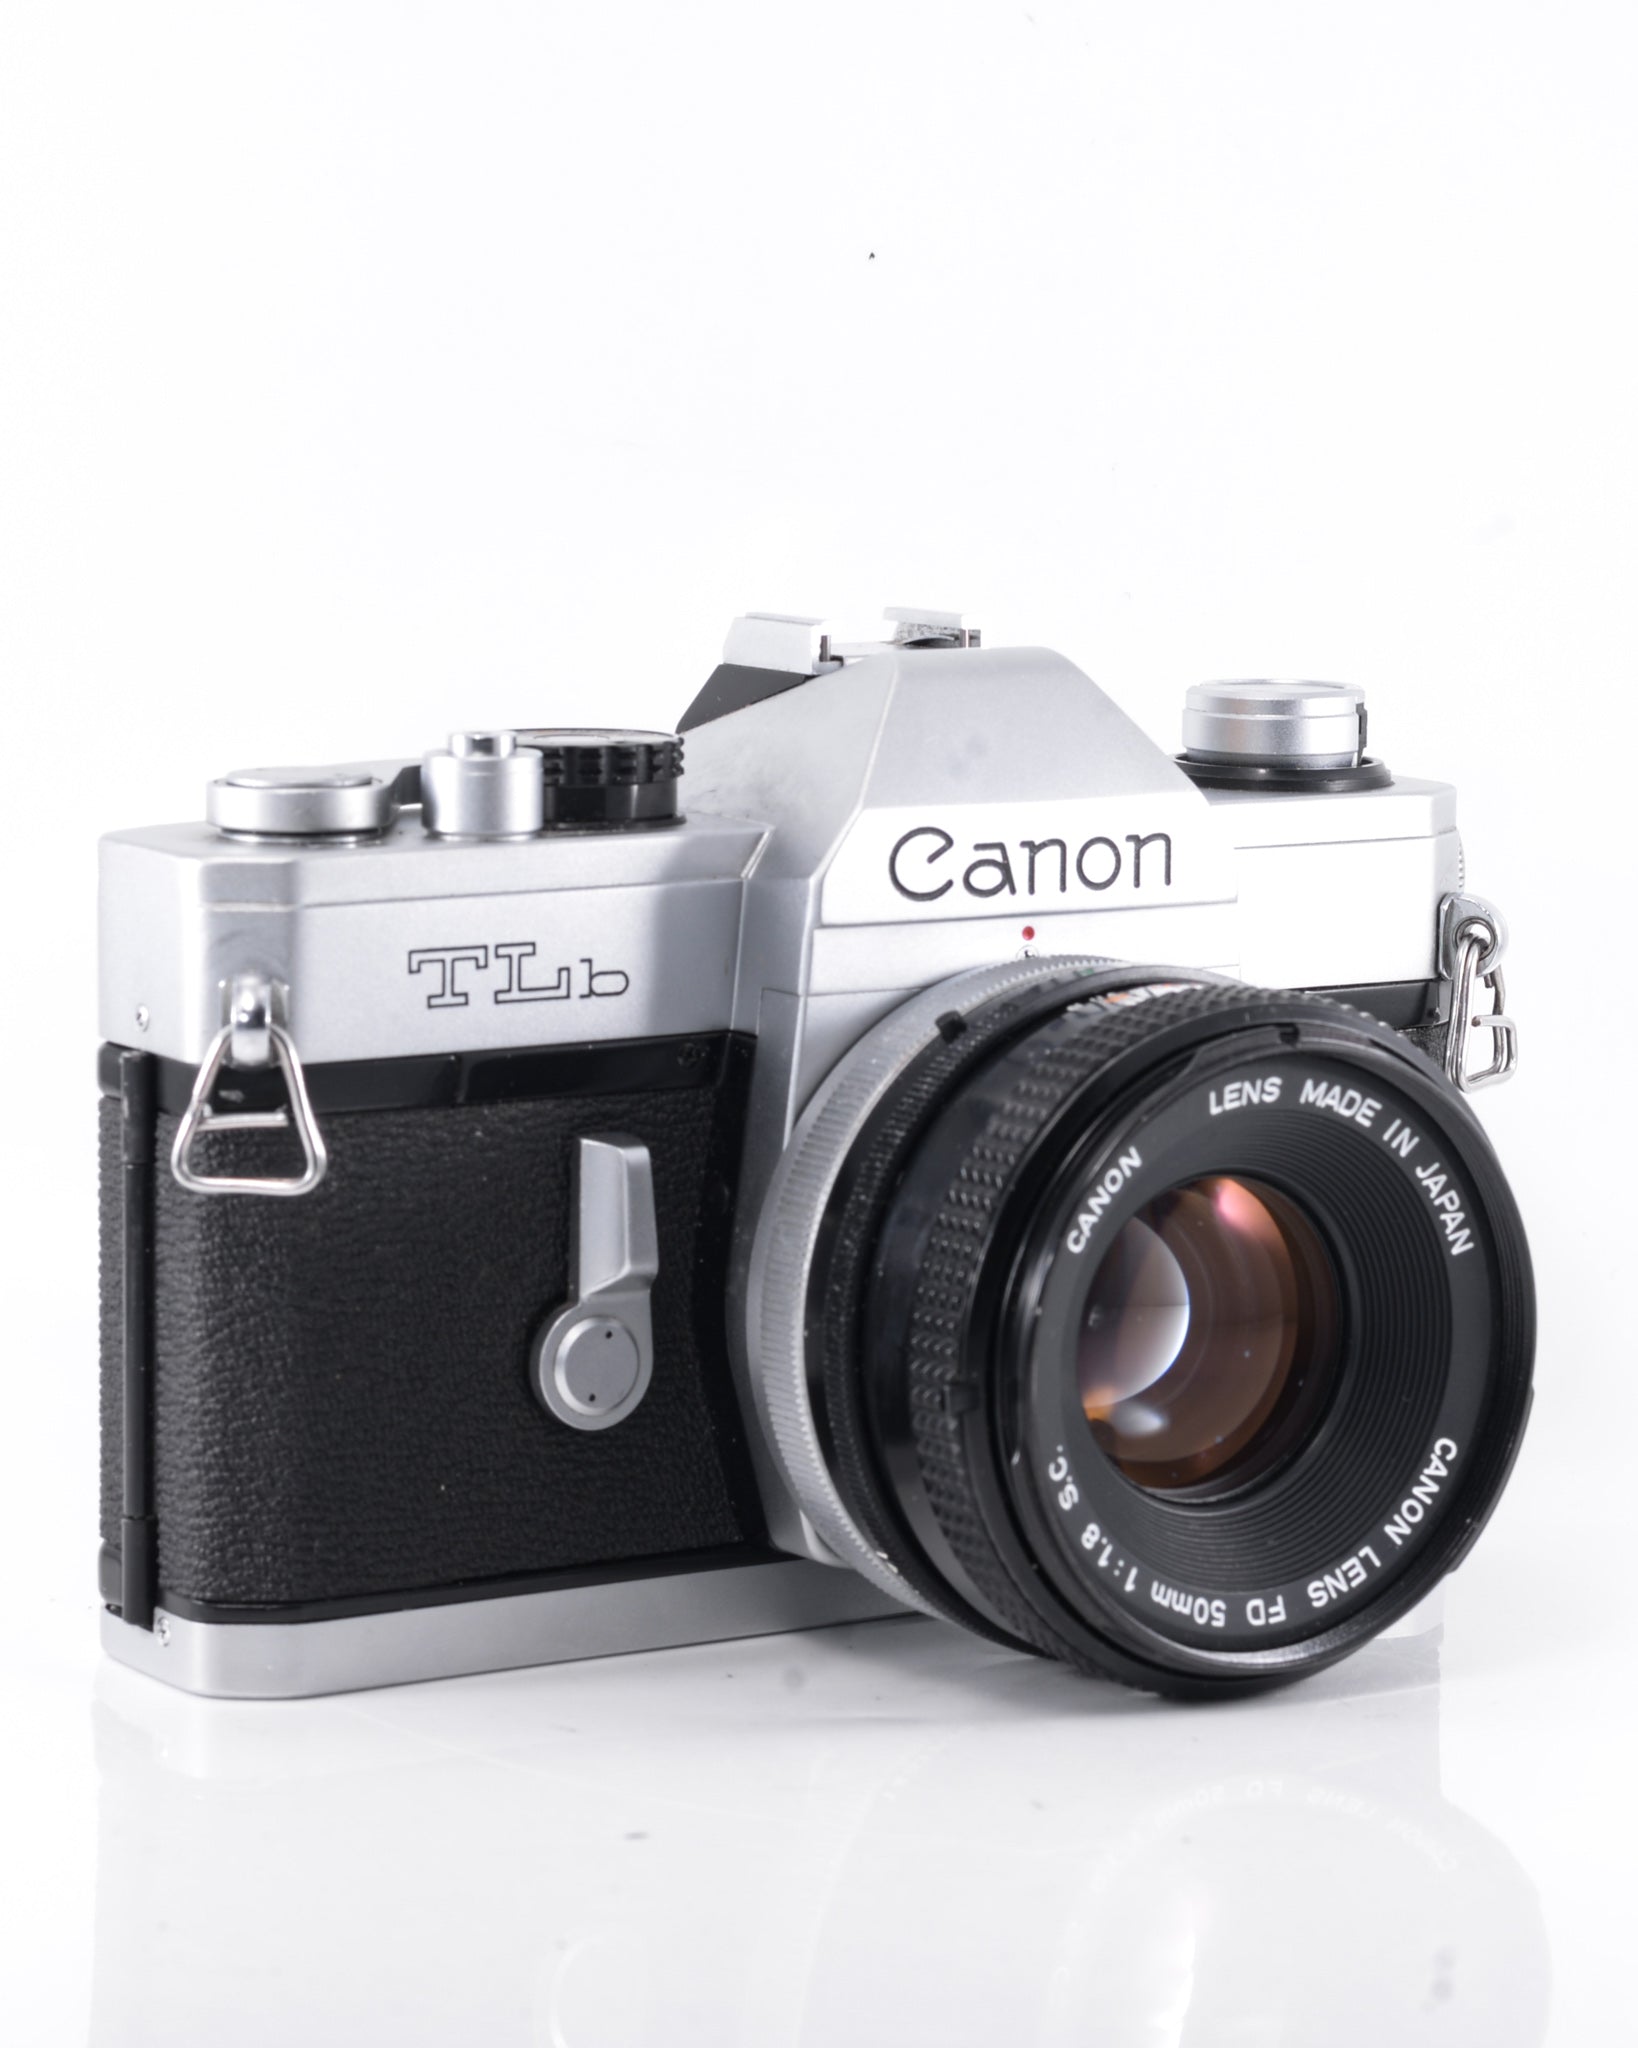 Canon TLB 35mm SLR film camera with 50mm f1.8 lens